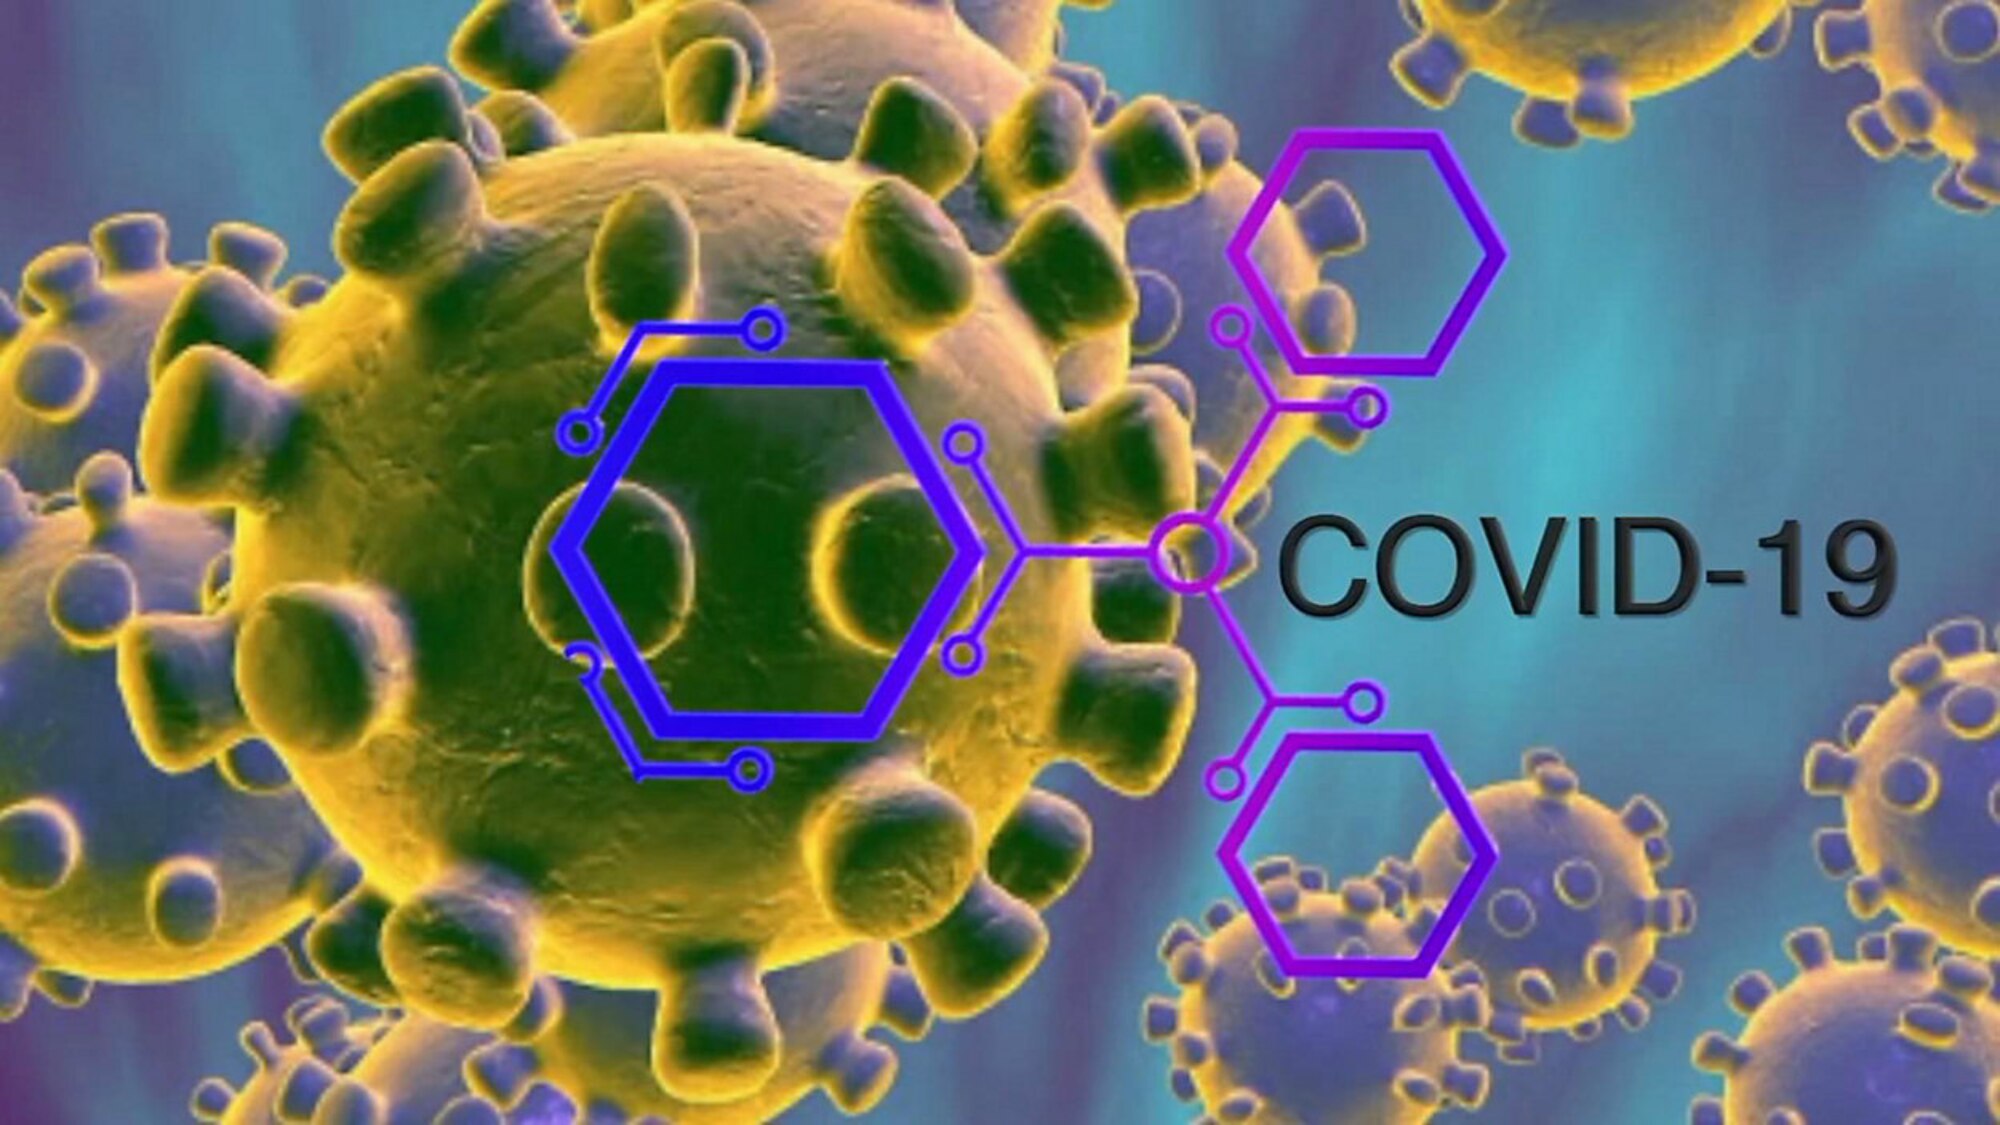 A picture graphic depicting the COVID-19 virus strain.